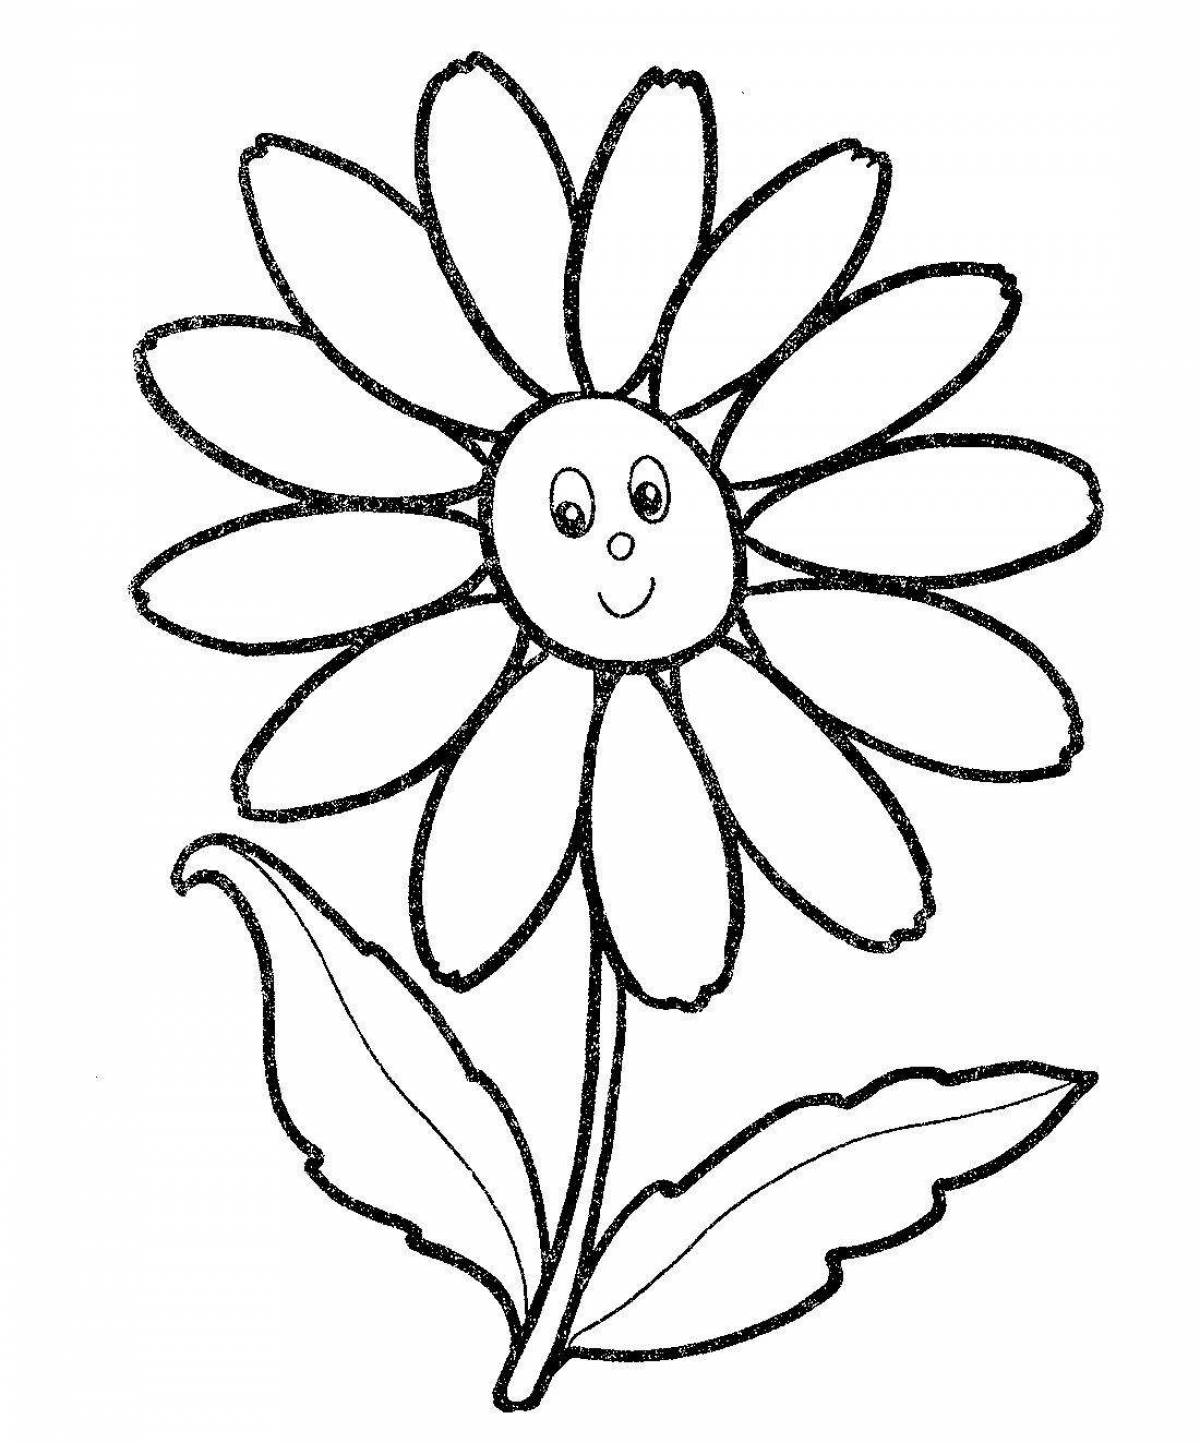 Awesome daisy coloring pages for preschoolers